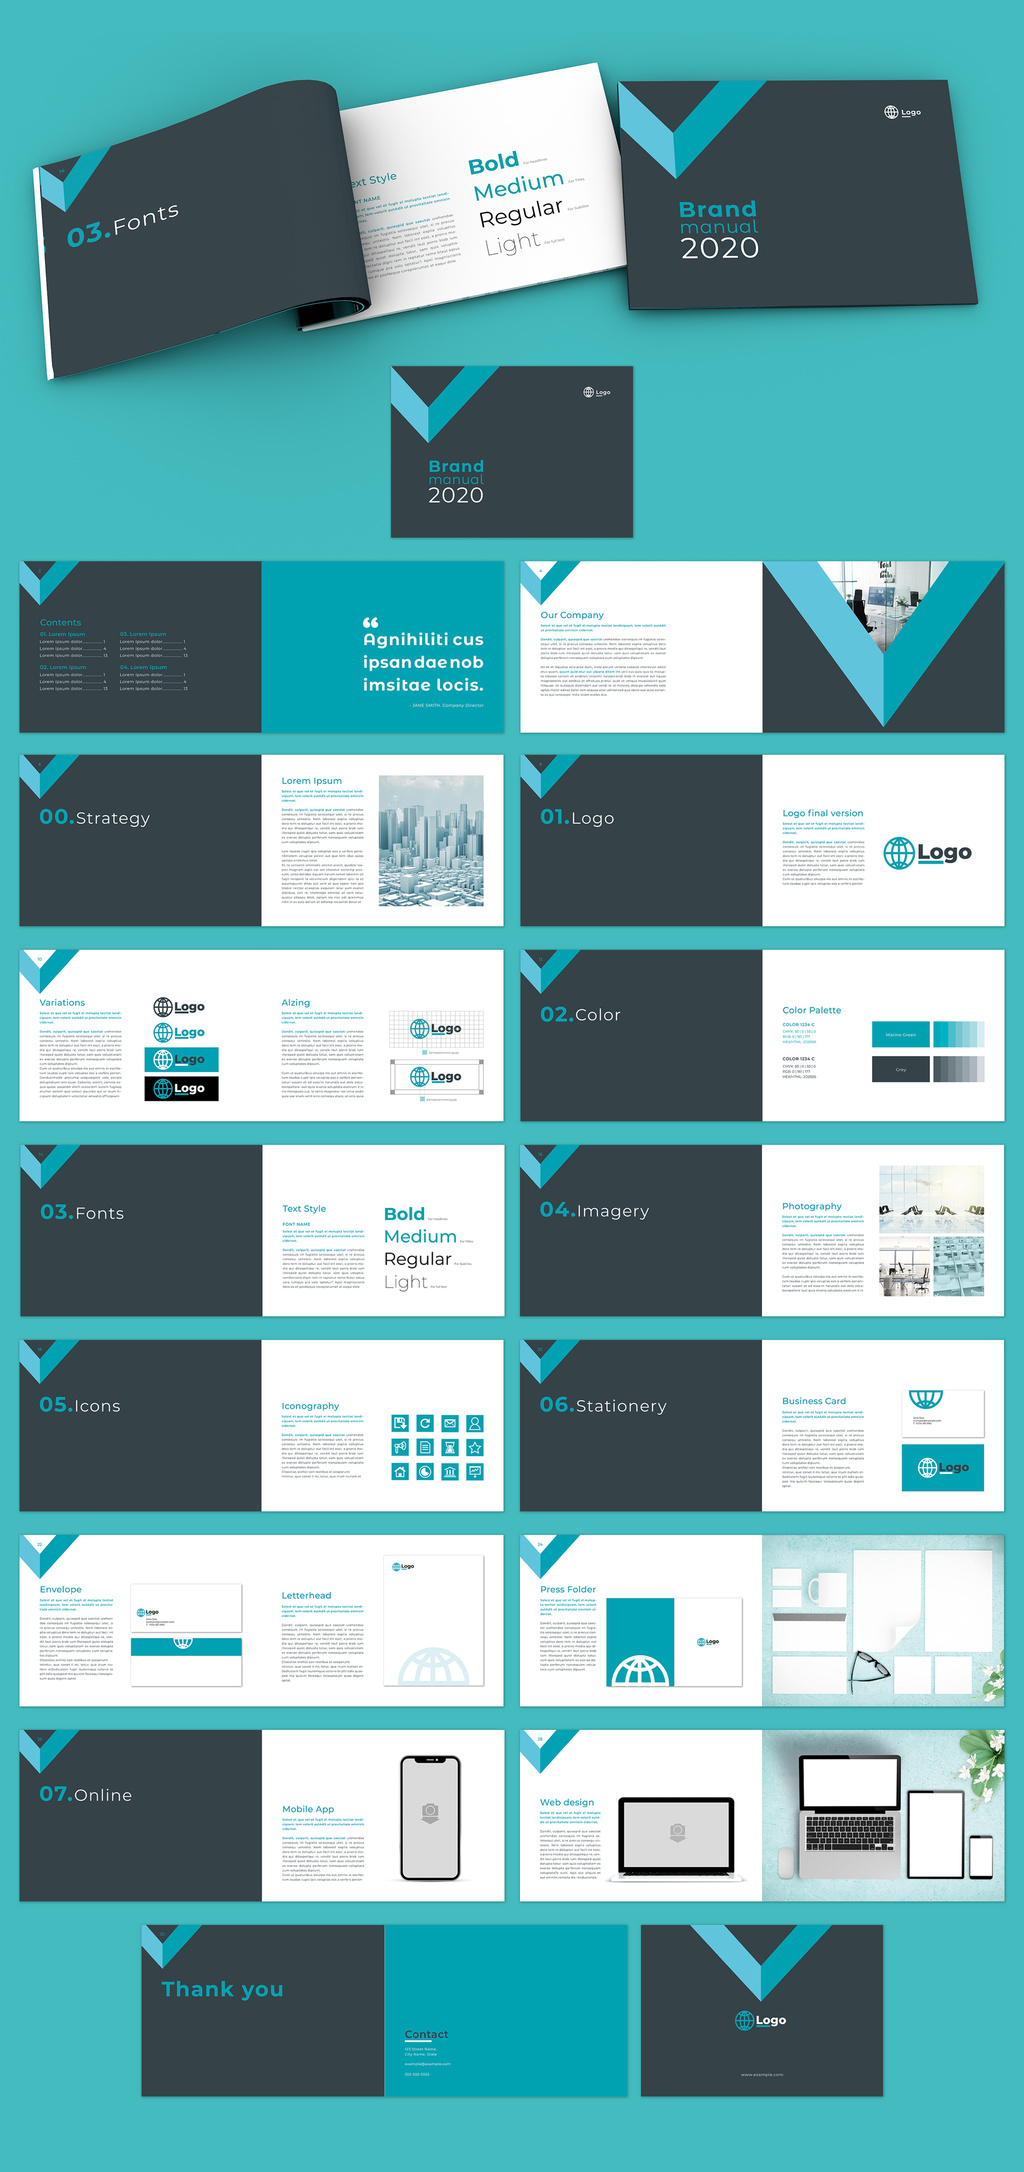 Style Guide Template Indesign Free